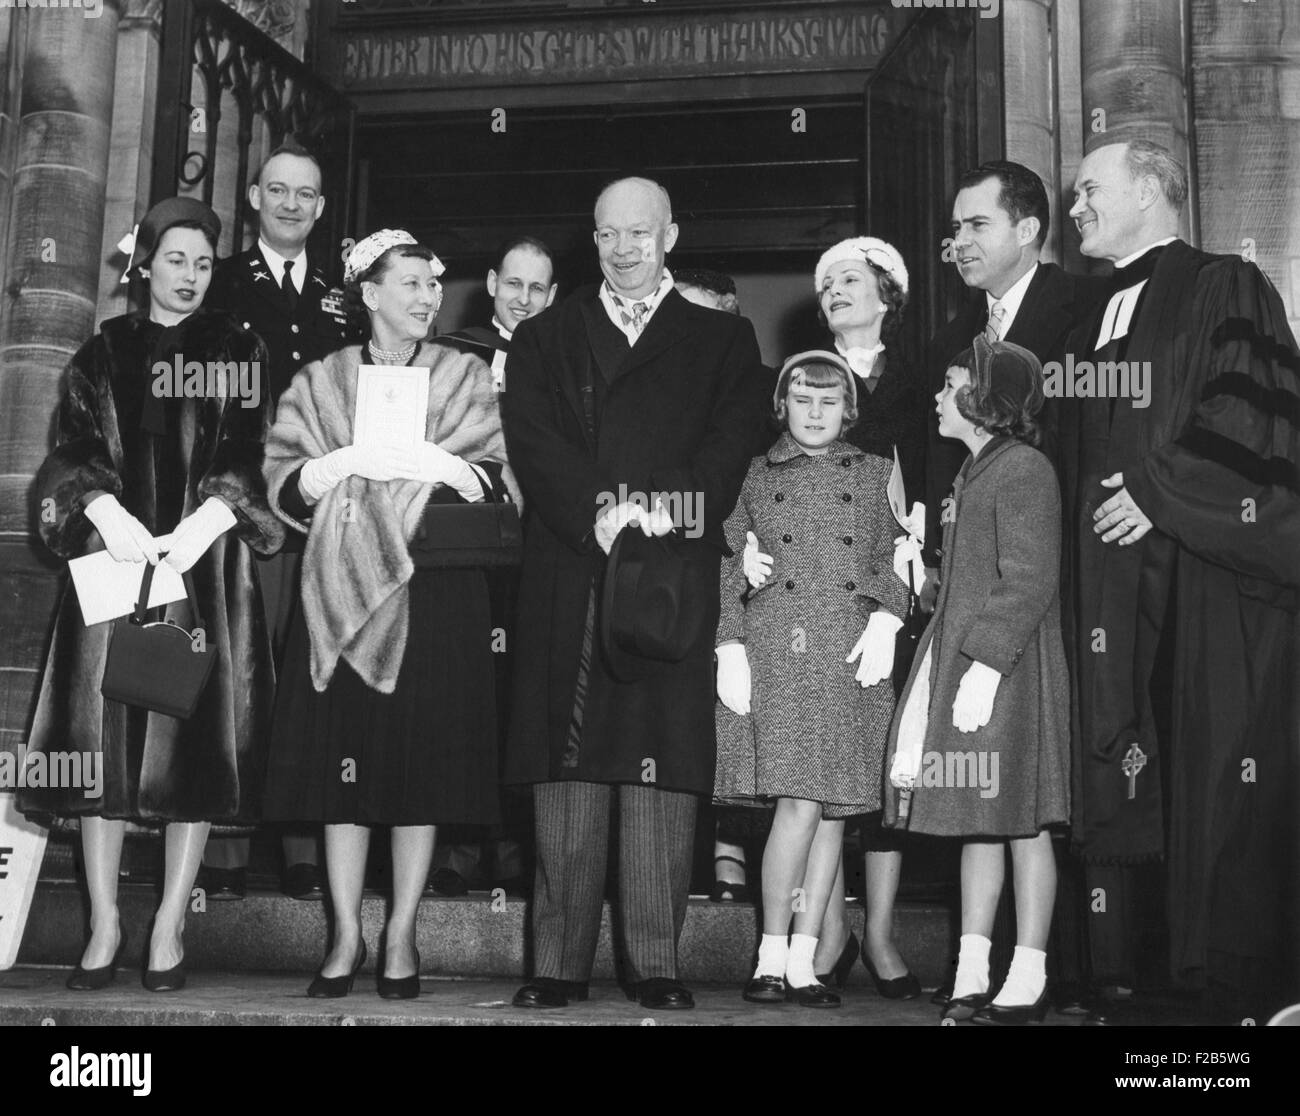 Eisenhower and Nixon families leaving the National Presbyterian Church on Inaugural morning. Jan. 20, 1957. L to R: Barbara Eisenhower, John Eisenhower, Mamie Eisenhower, President Eisenhower, Tricia Nixon, Pat Nixon, Richard Nixon with Julie Nixon standing in front of him, and Reverend Edward Elson. - (BSLOC 2014 16 30) Stock Photo